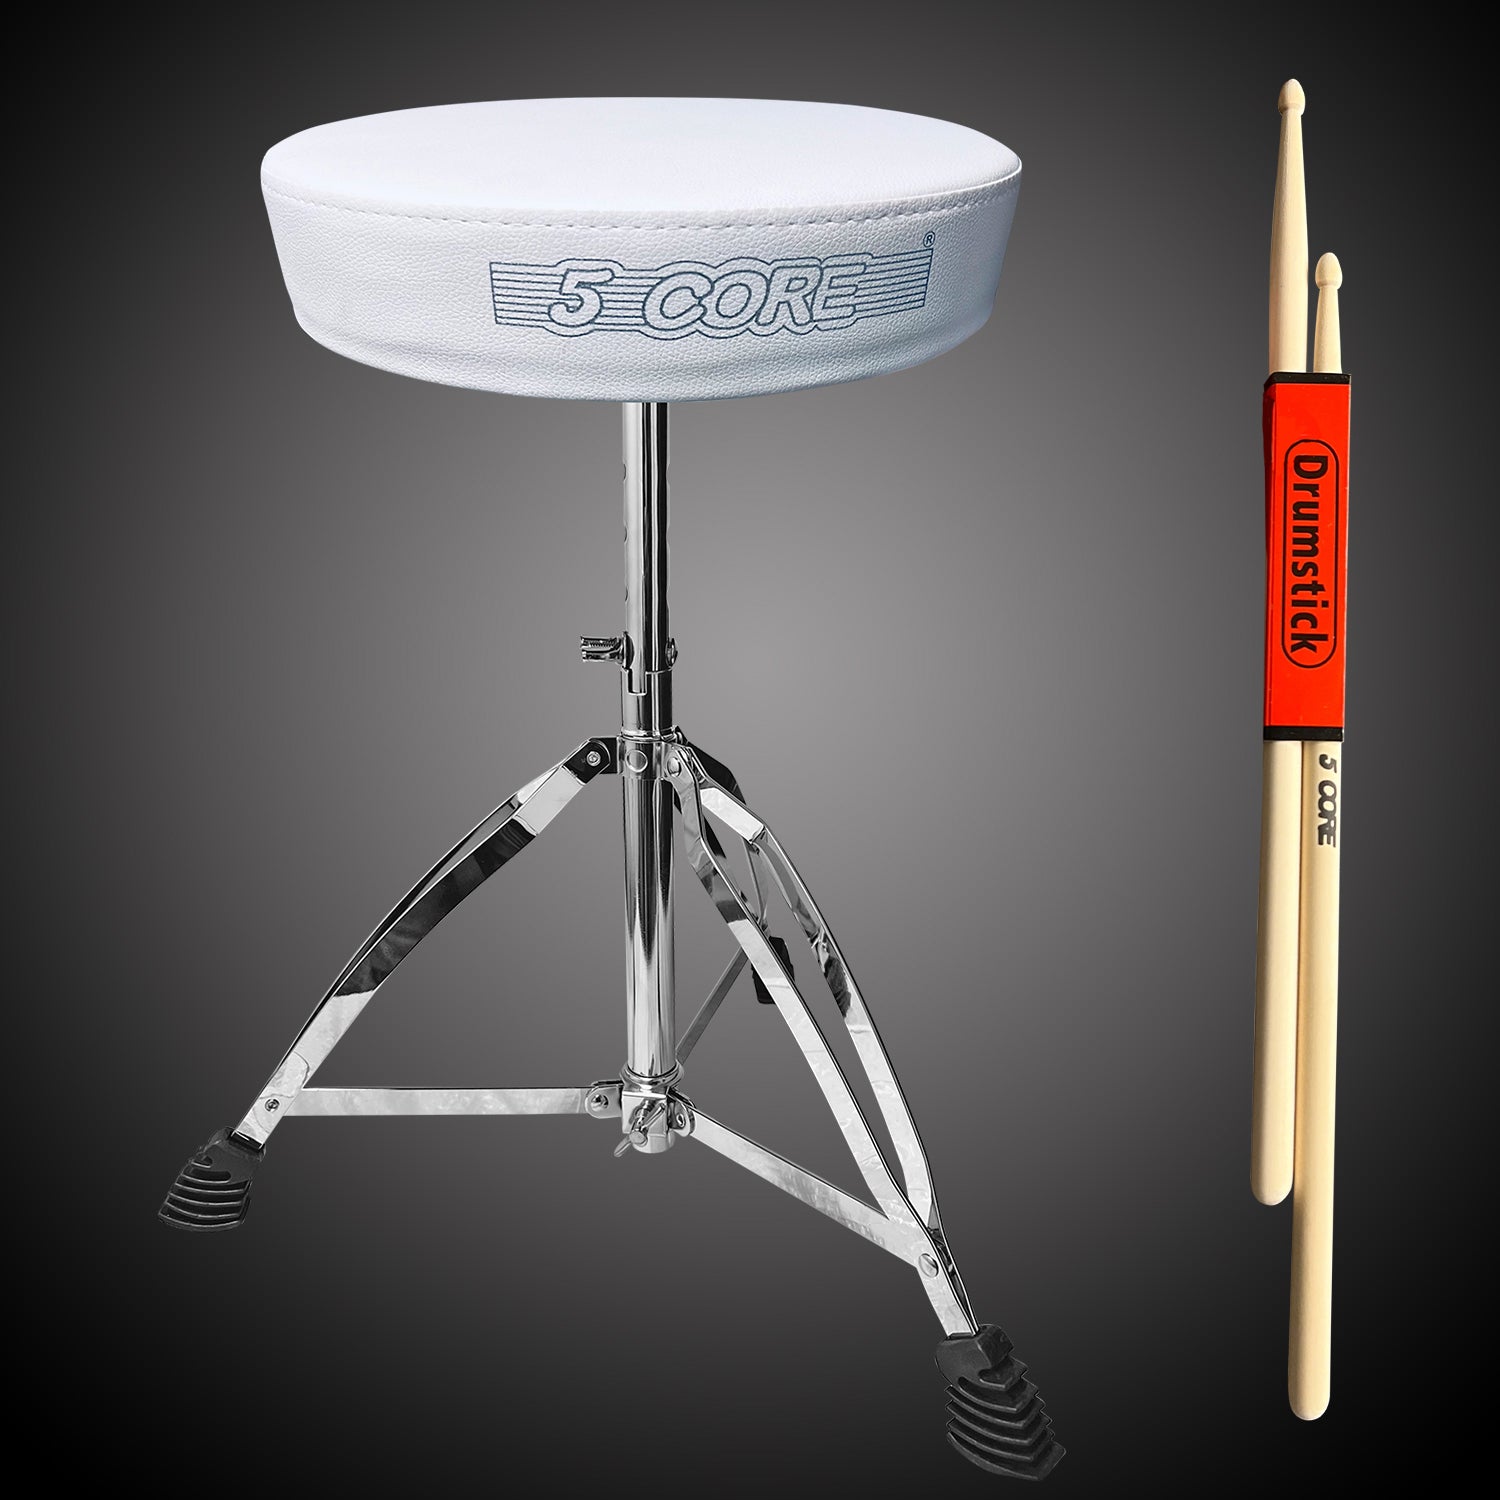 5 Core Drum Throne Guitar Stool Thick Padded Drummers Chair Piano Seat Chrome White